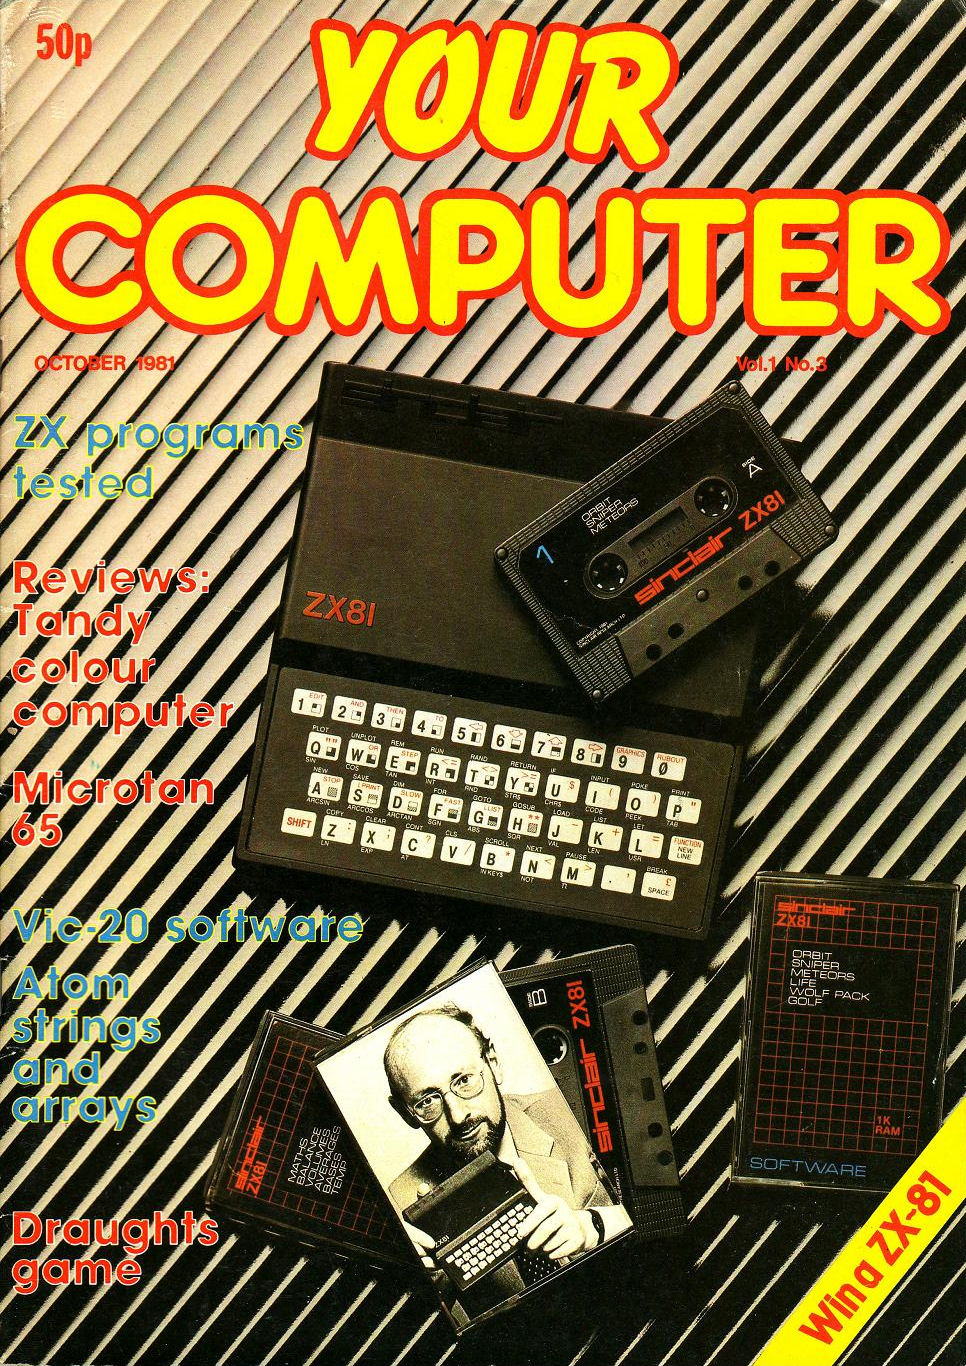 Sinclair ZX81 Cassette No 1 | Magazines from the Past Wiki | Fandom